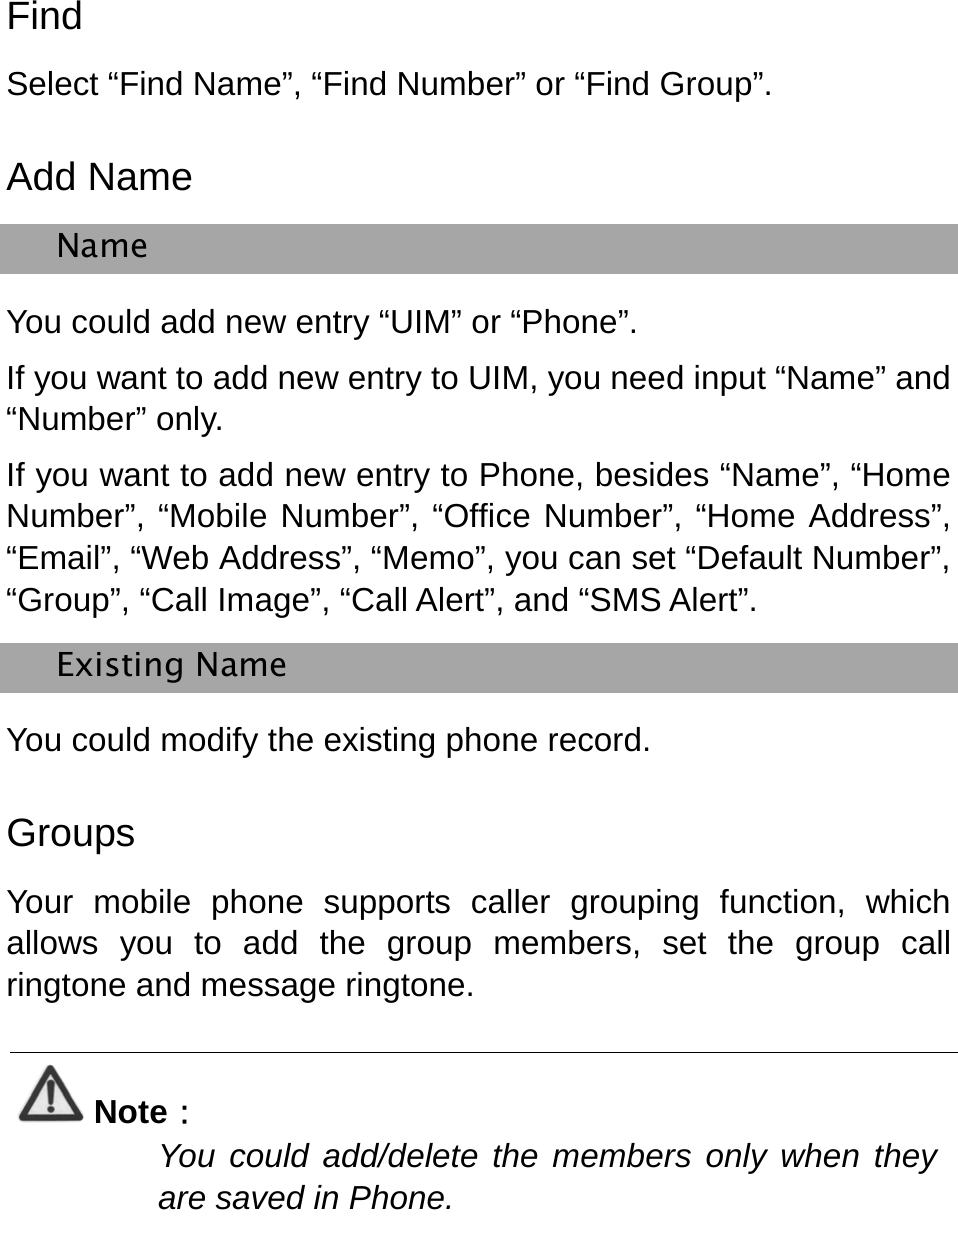   Find Select “Find Name”, “Find Number” or “Find Group”.   Add Name Name You could add new entry “UIM” or “Phone”. If you want to add new entry to UIM, you need input “Name” and “Number” only. If you want to add new entry to Phone, besides “Name”, “Home Number”, “Mobile Number”, “Office Number”, “Home Address”, “Email”, “Web Address”, “Memo”, you can set “Default Number”, “Group”, “Call Image”, “Call Alert”, and “SMS Alert”. Existing Name You could modify the existing phone record.   Groups Your mobile phone supports caller grouping function, which allows you to add the group members, set the group call ringtone and message ringtone.      Note： You could add/delete the members only when they are saved in Phone.  